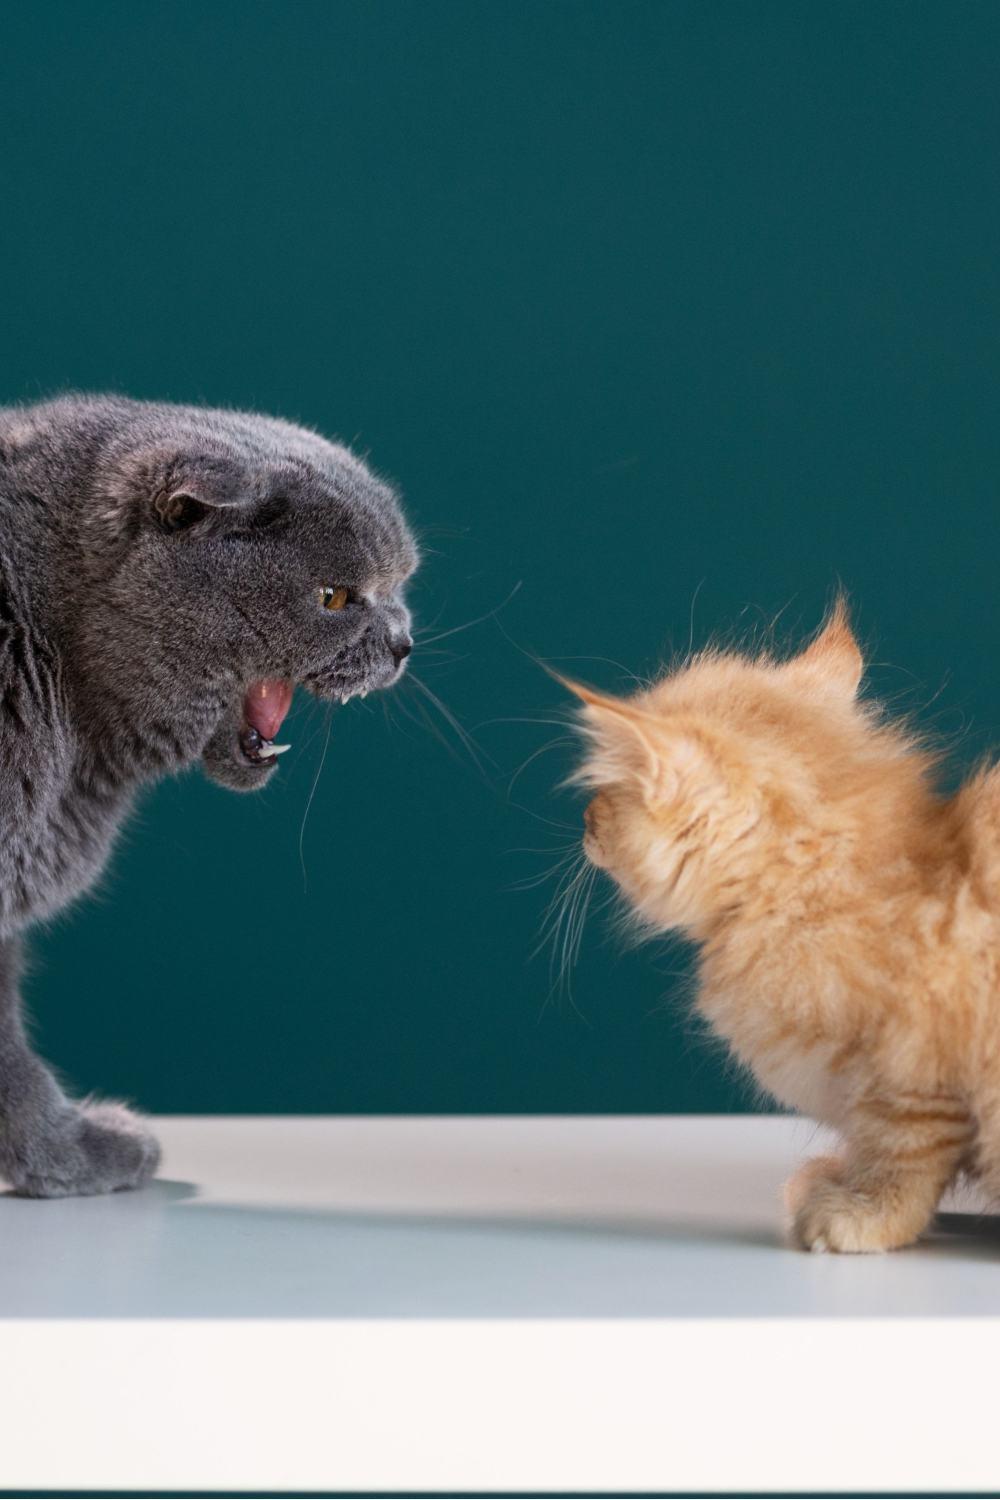 cat angry at the kitten